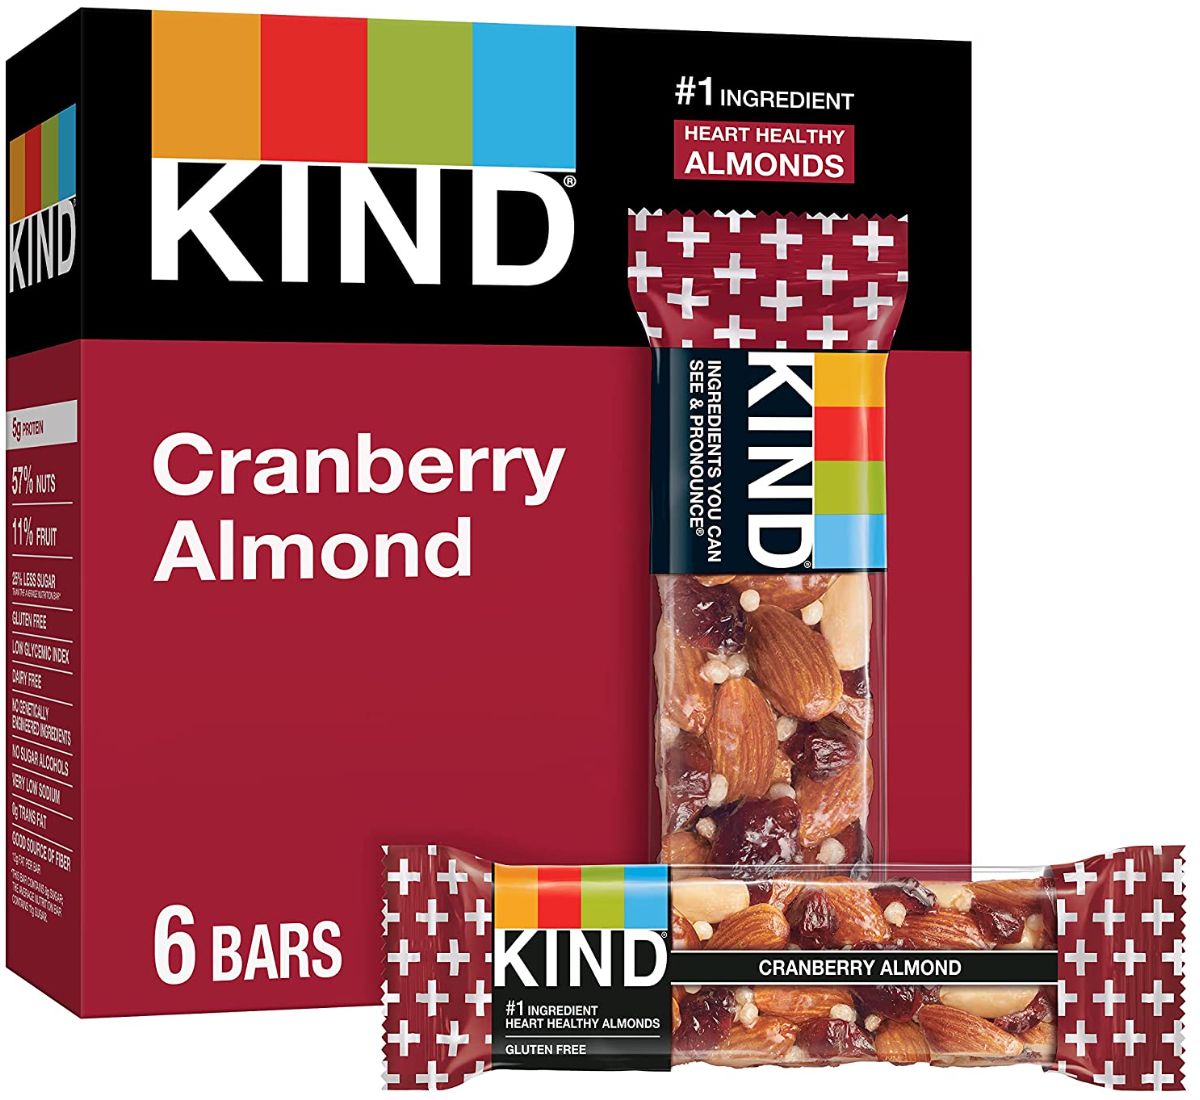 KIND Cashew Bars 6-Pack Just $4.49 Shipped on Amazon (Regularly $7.48)